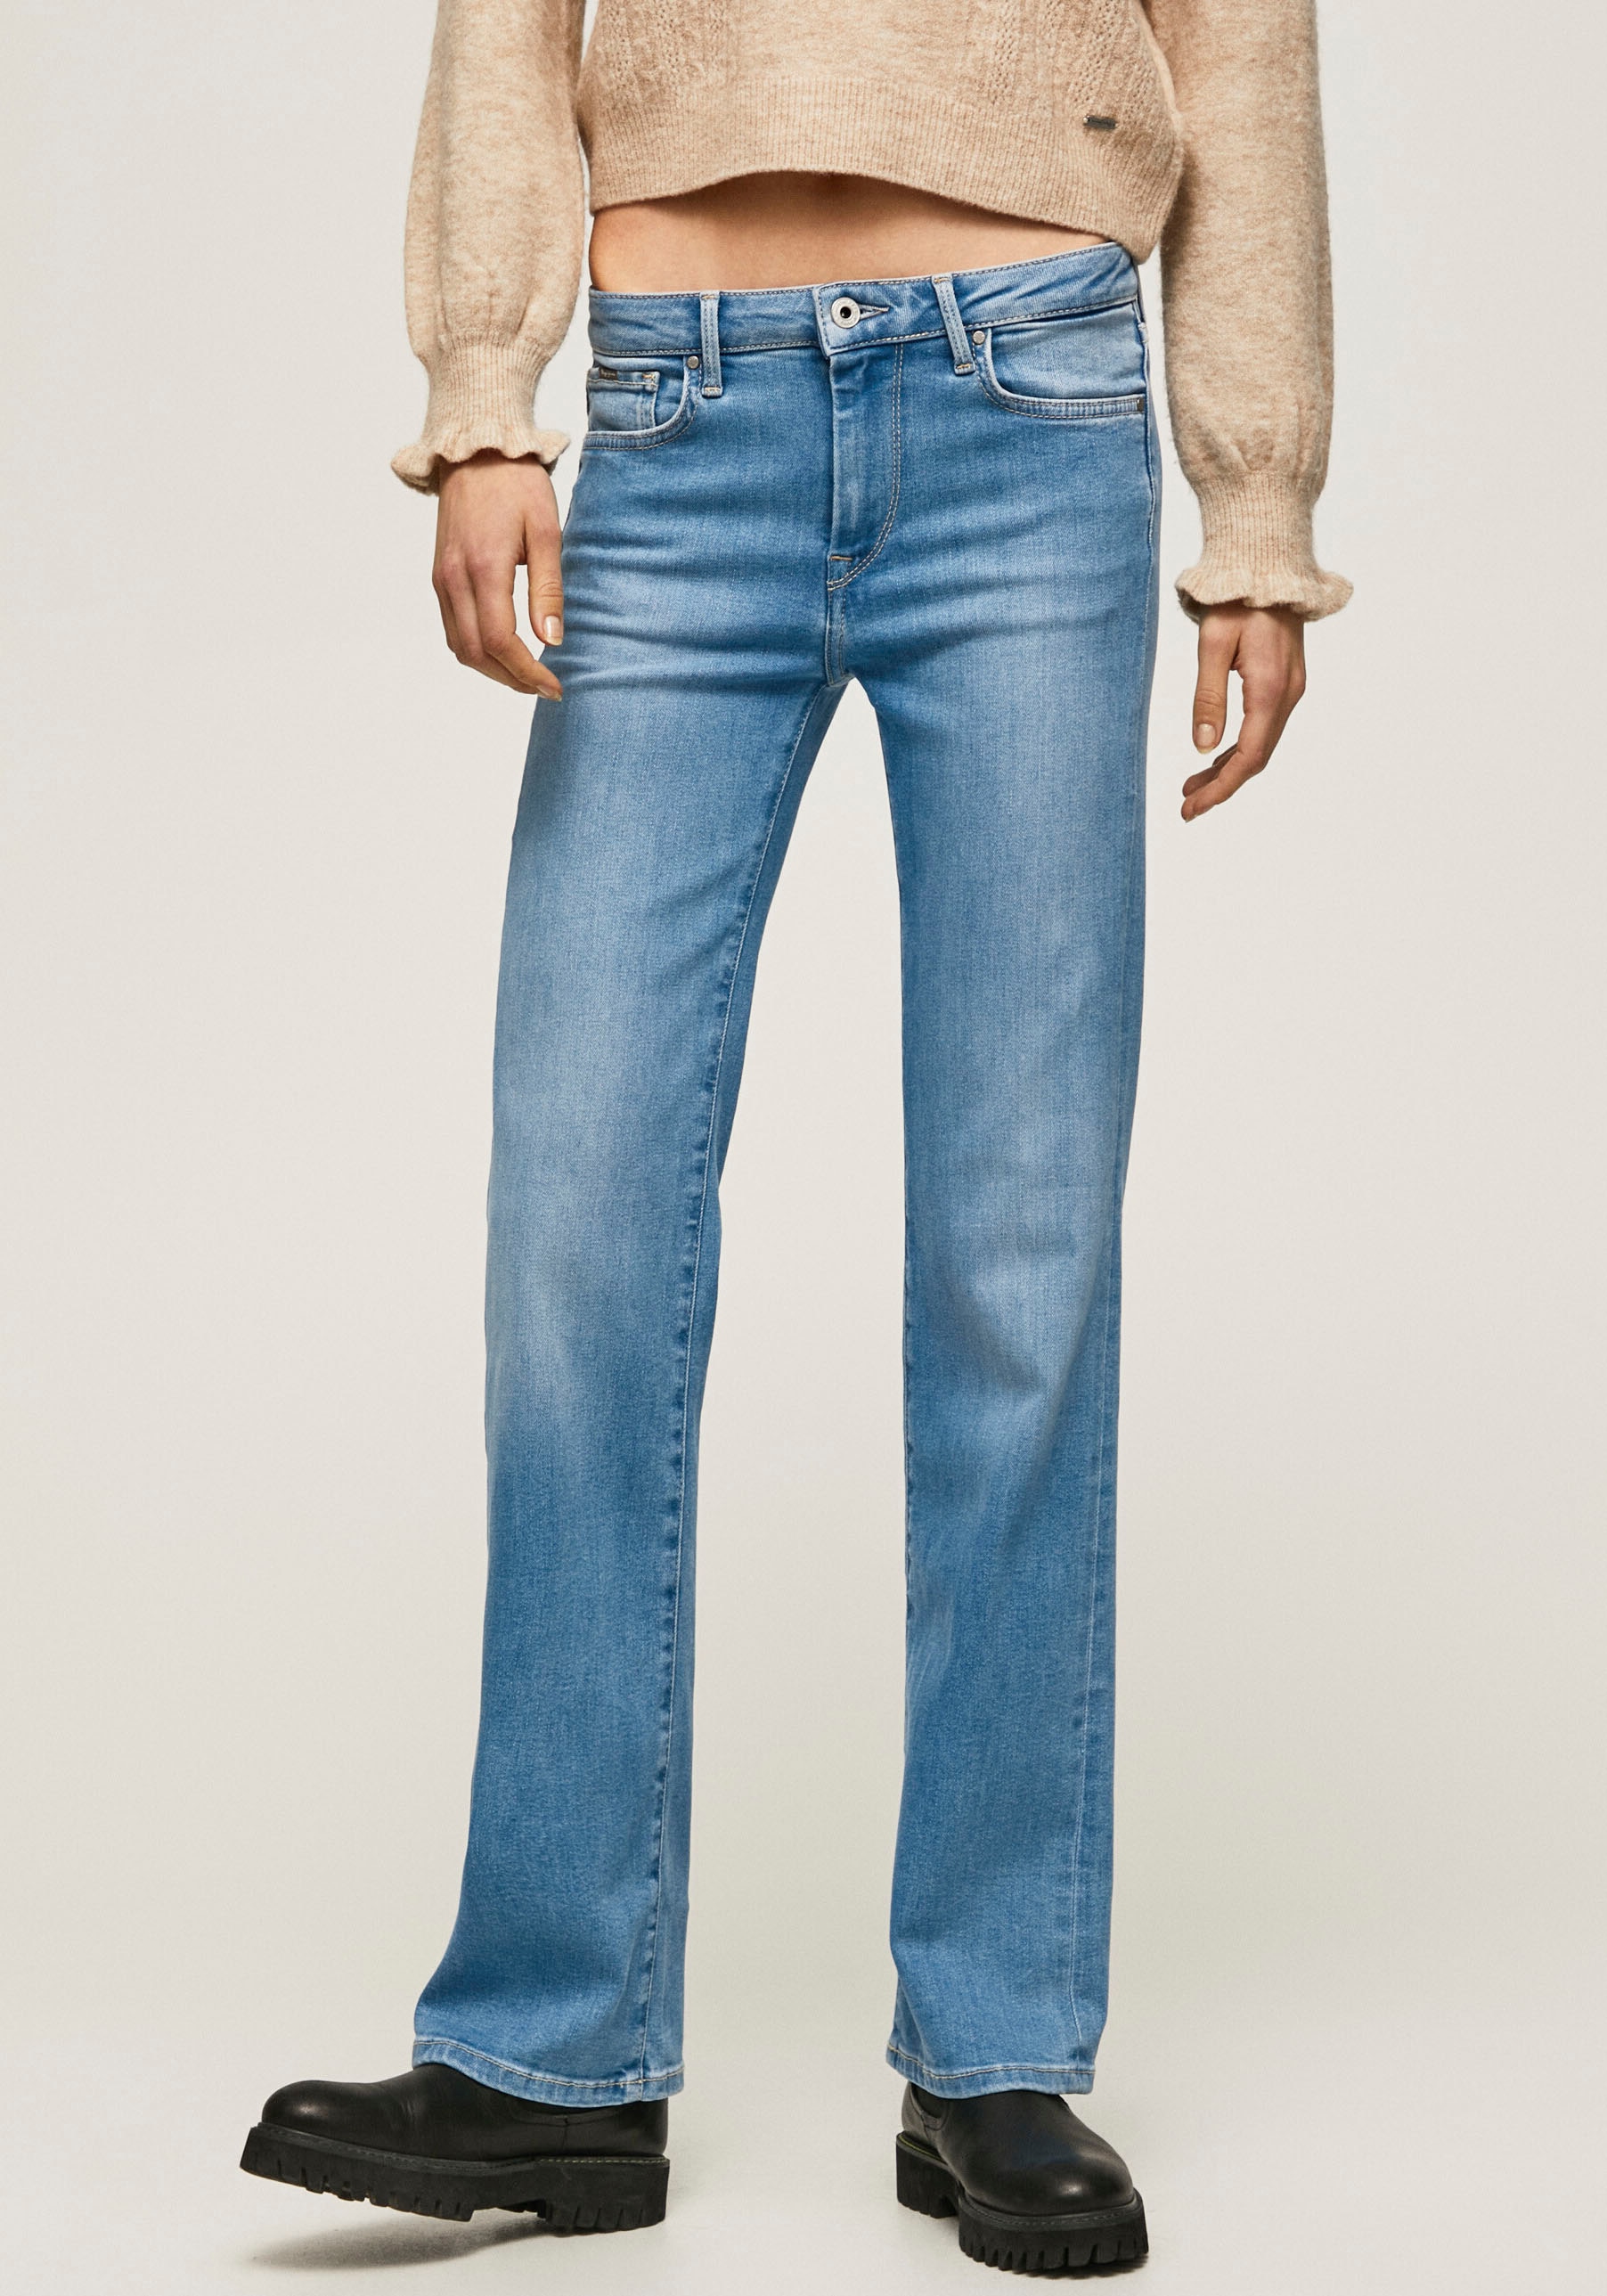 »AUBREY« Jeans bei Pepe Straight-Jeans ♕